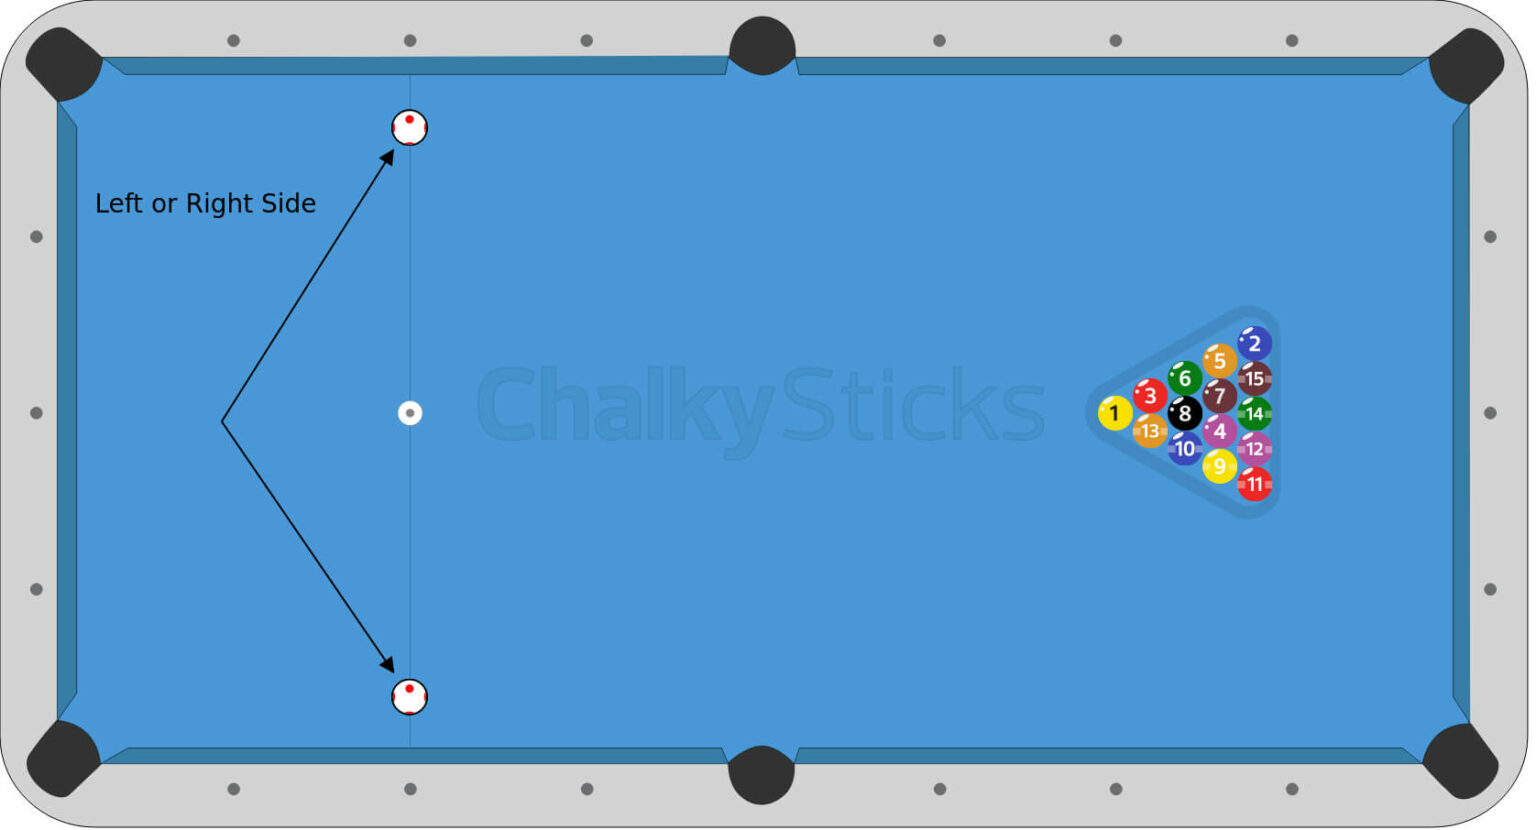 Do You Win if You Make the 8 Ball on the Break? - The Cue Cave